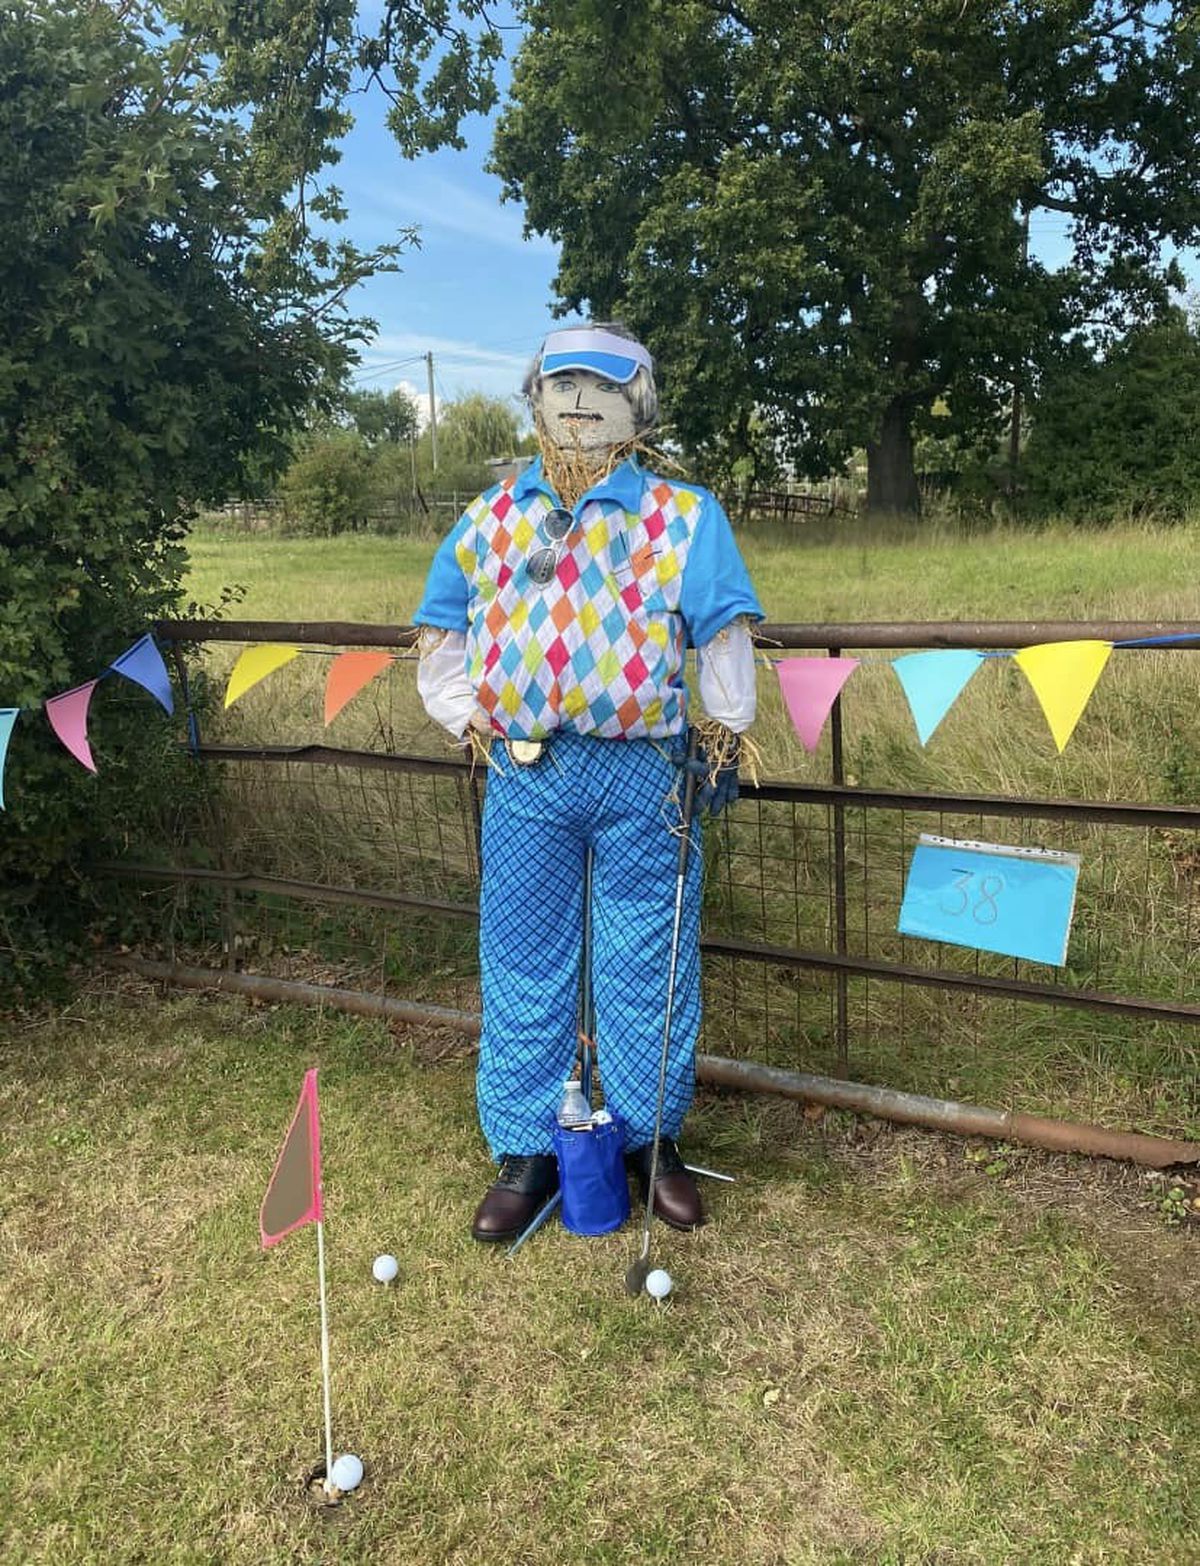 One of the scarecrows in Whixhall